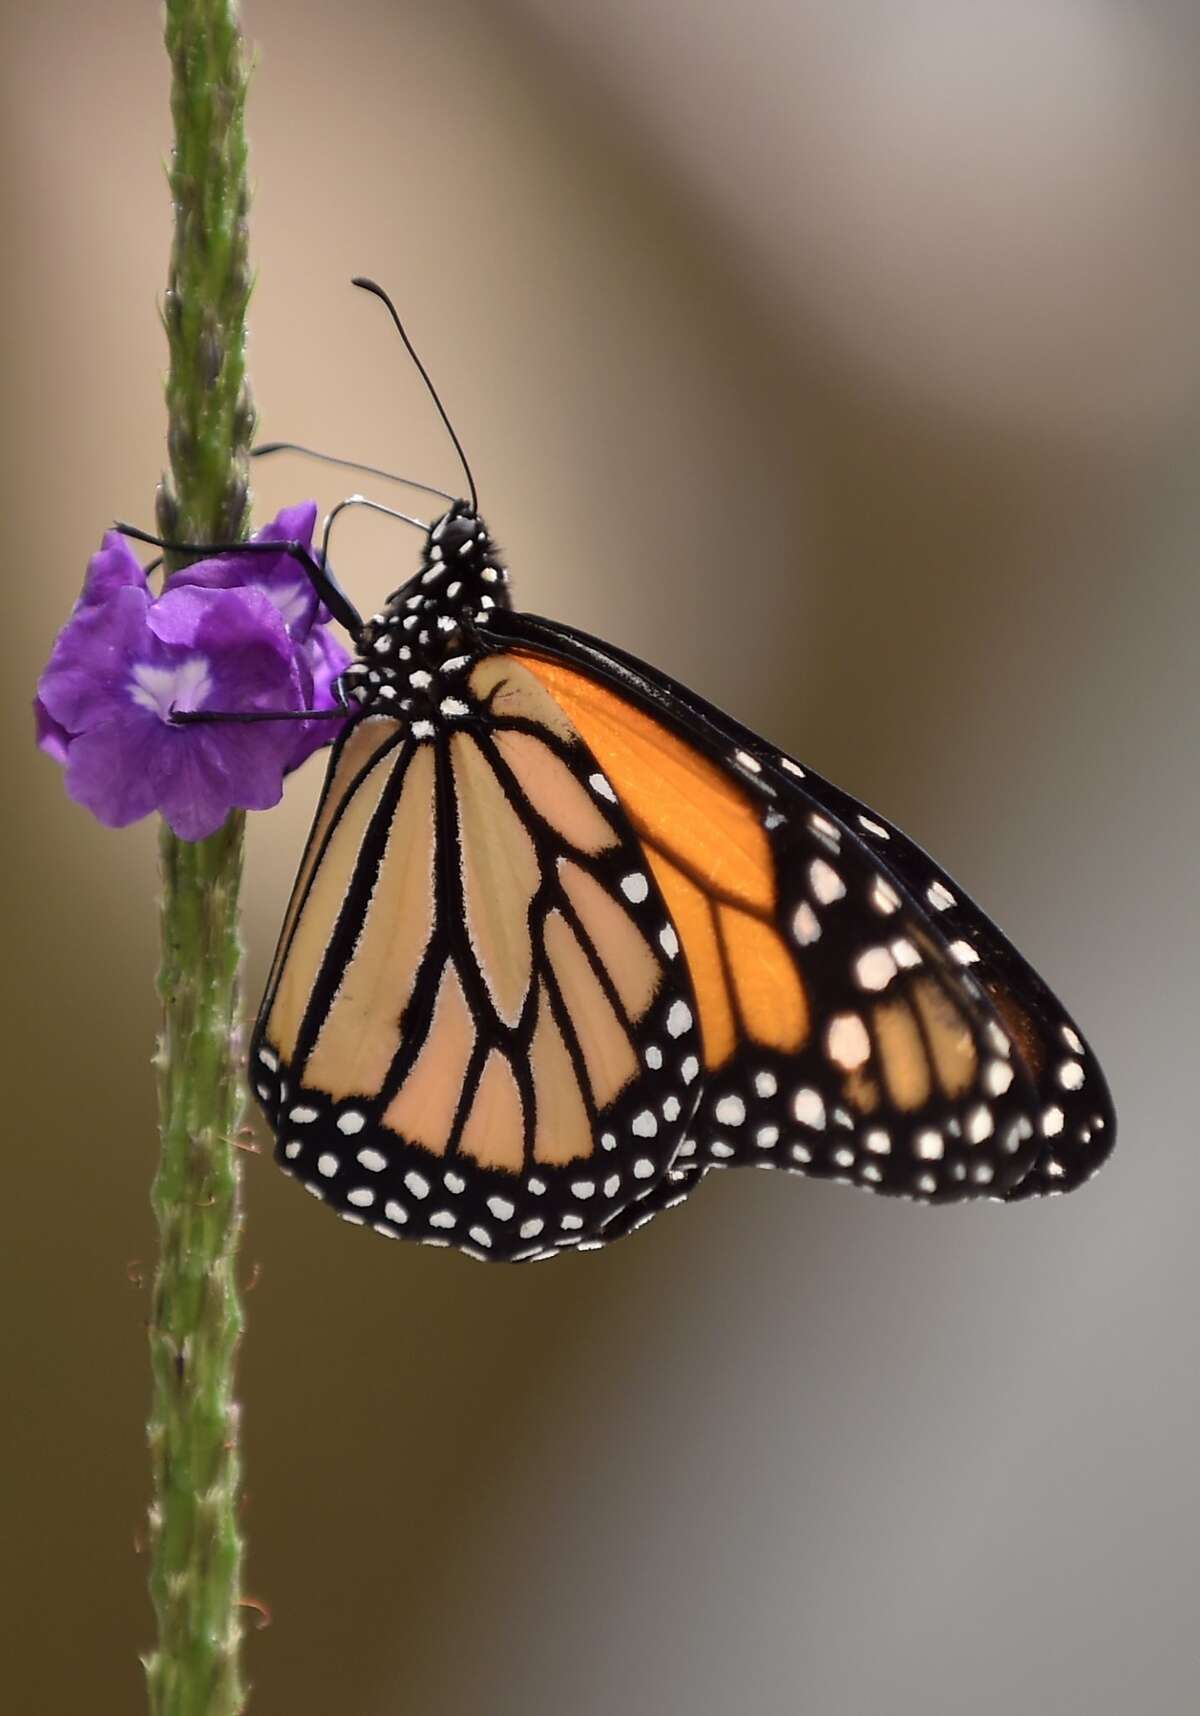 A Monarch butterfly (Danaus plexippus) is pictured at a butterfly farm in the Chapultepec Zoo in Mexico City on April 7, 2017. Millions of monarch butterflies arrive each year to Mexico after travelling more than 4,500 kilometres from the United States and Canada. / AFP PHOTO / Pedro Pardo (Photo credit should read PEDRO PARDO/AFP/Getty Images)